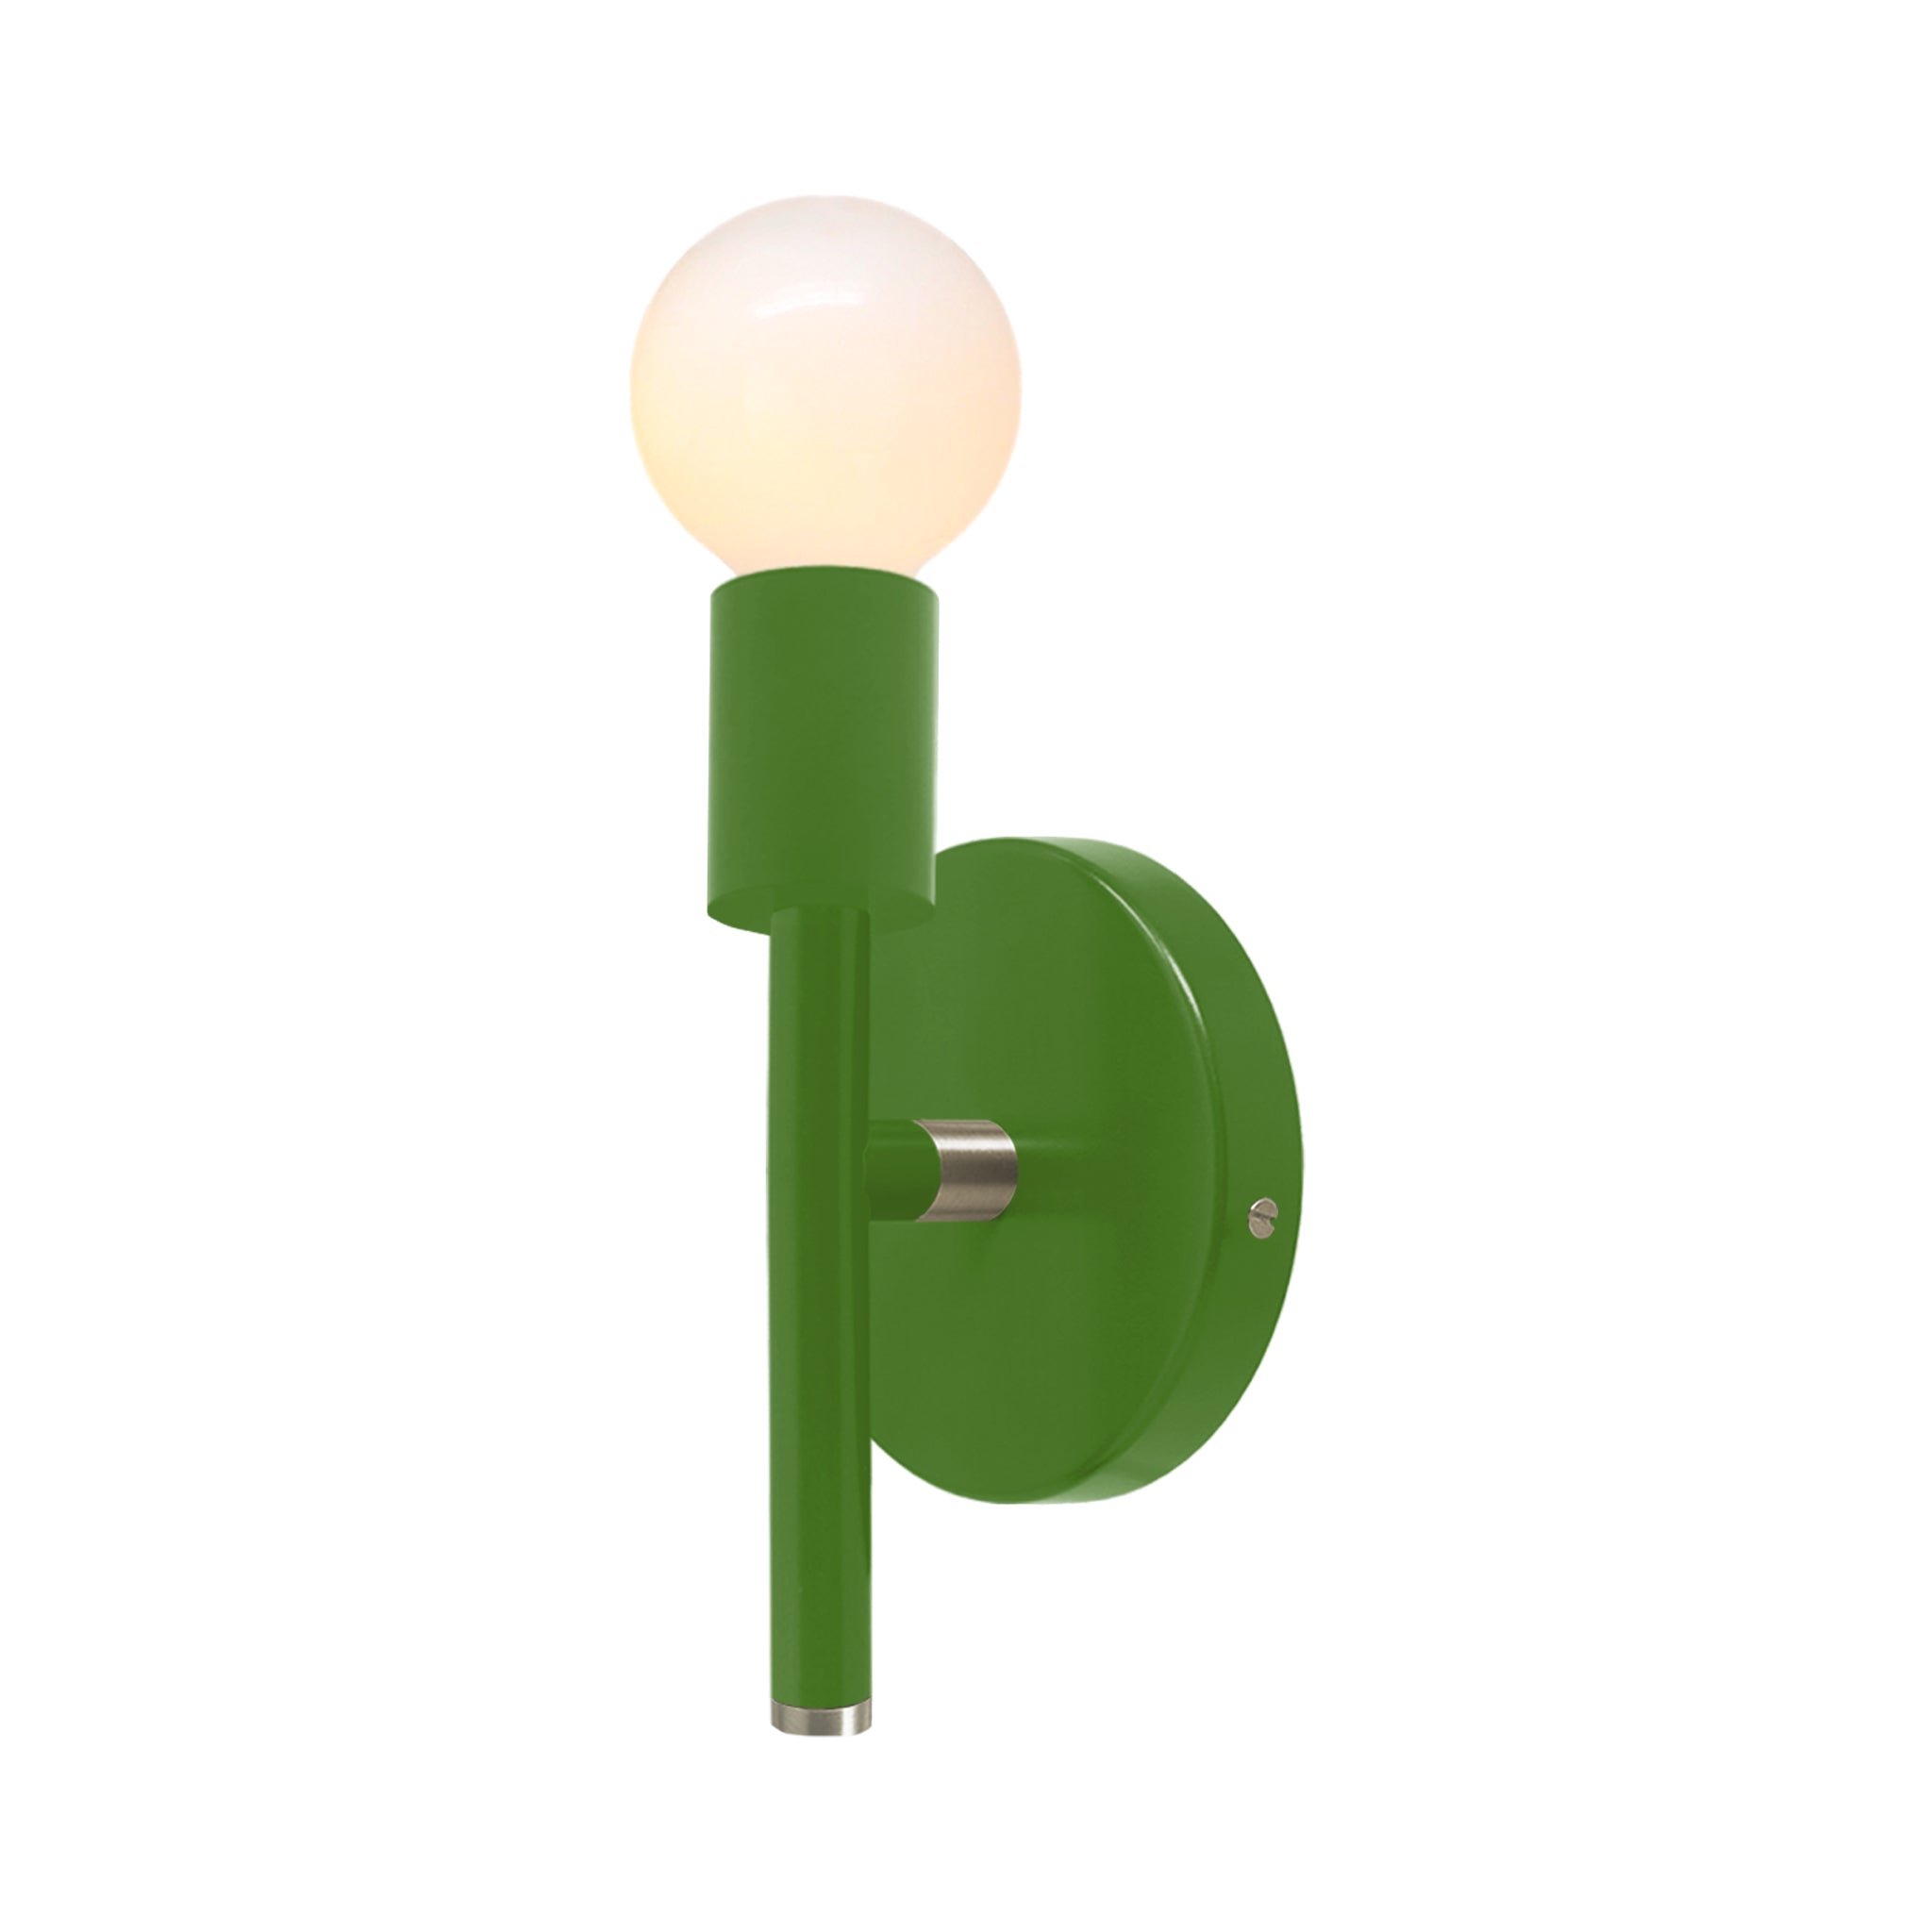 Nickel and lagoon color Major sconce 9" Dutton Brown lighting